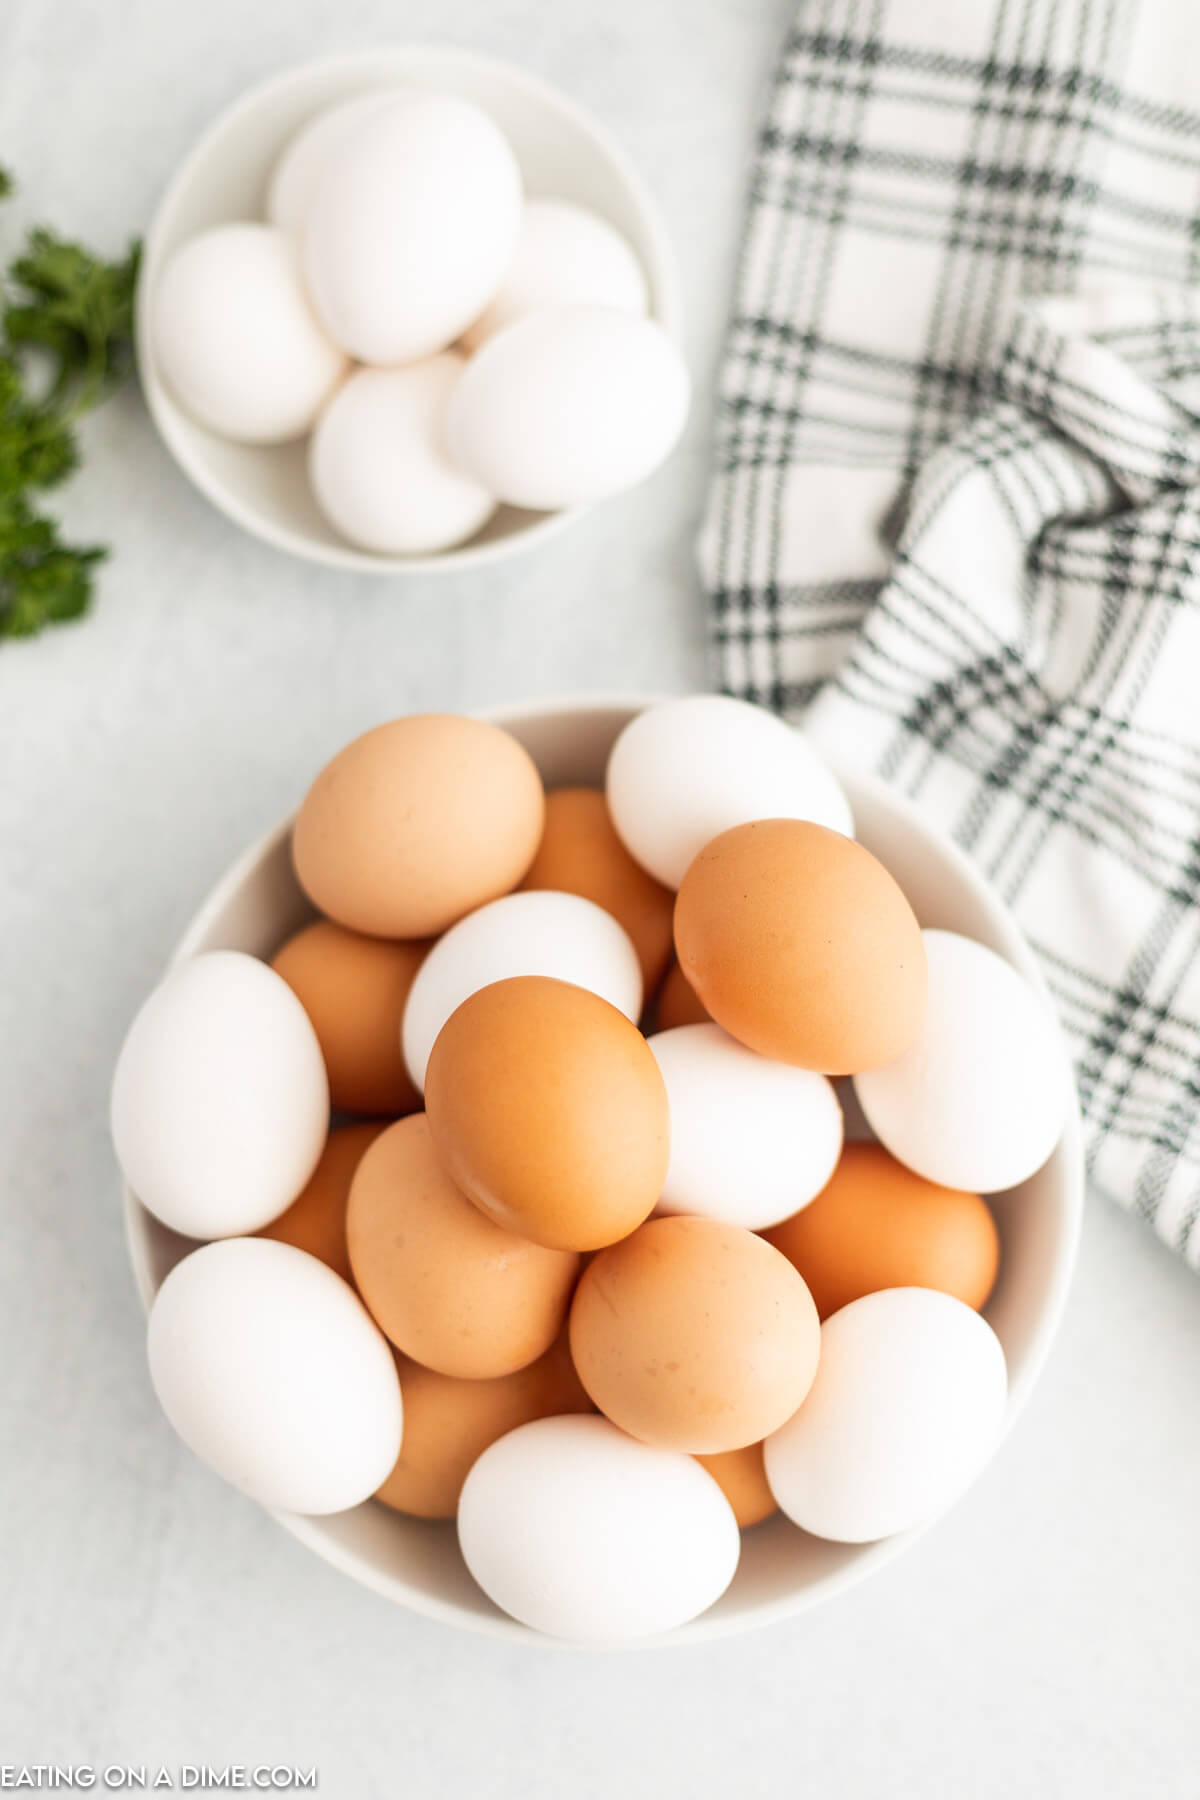 Brown and White eggs in a white bowl.